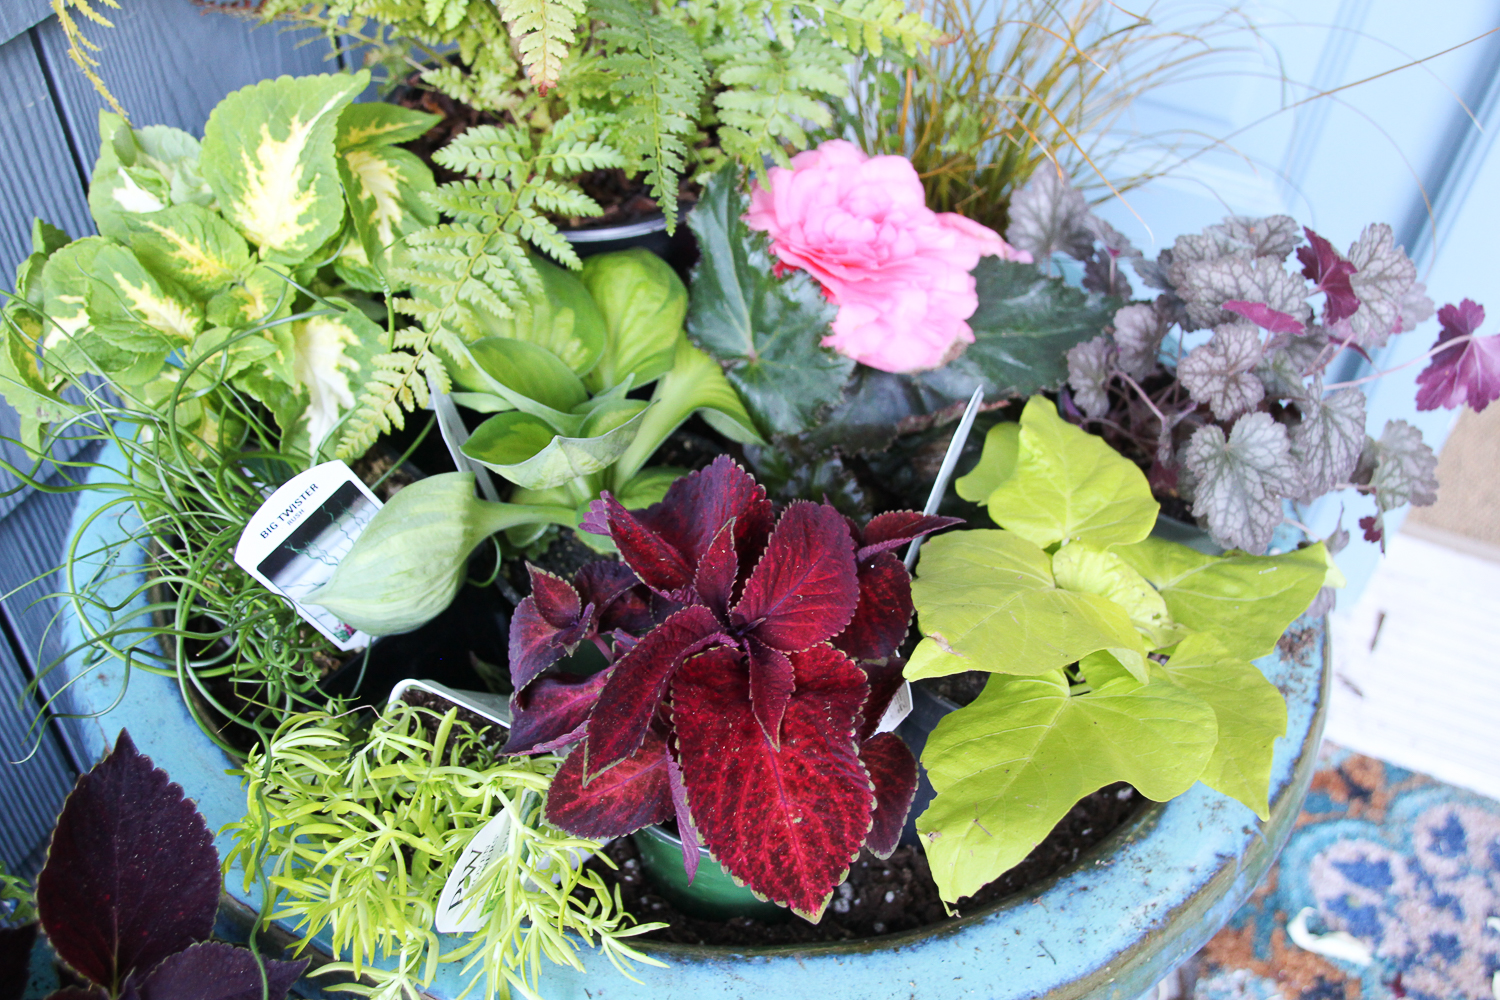 Pink flowering plant, dark red shade plant plus some light green plants.